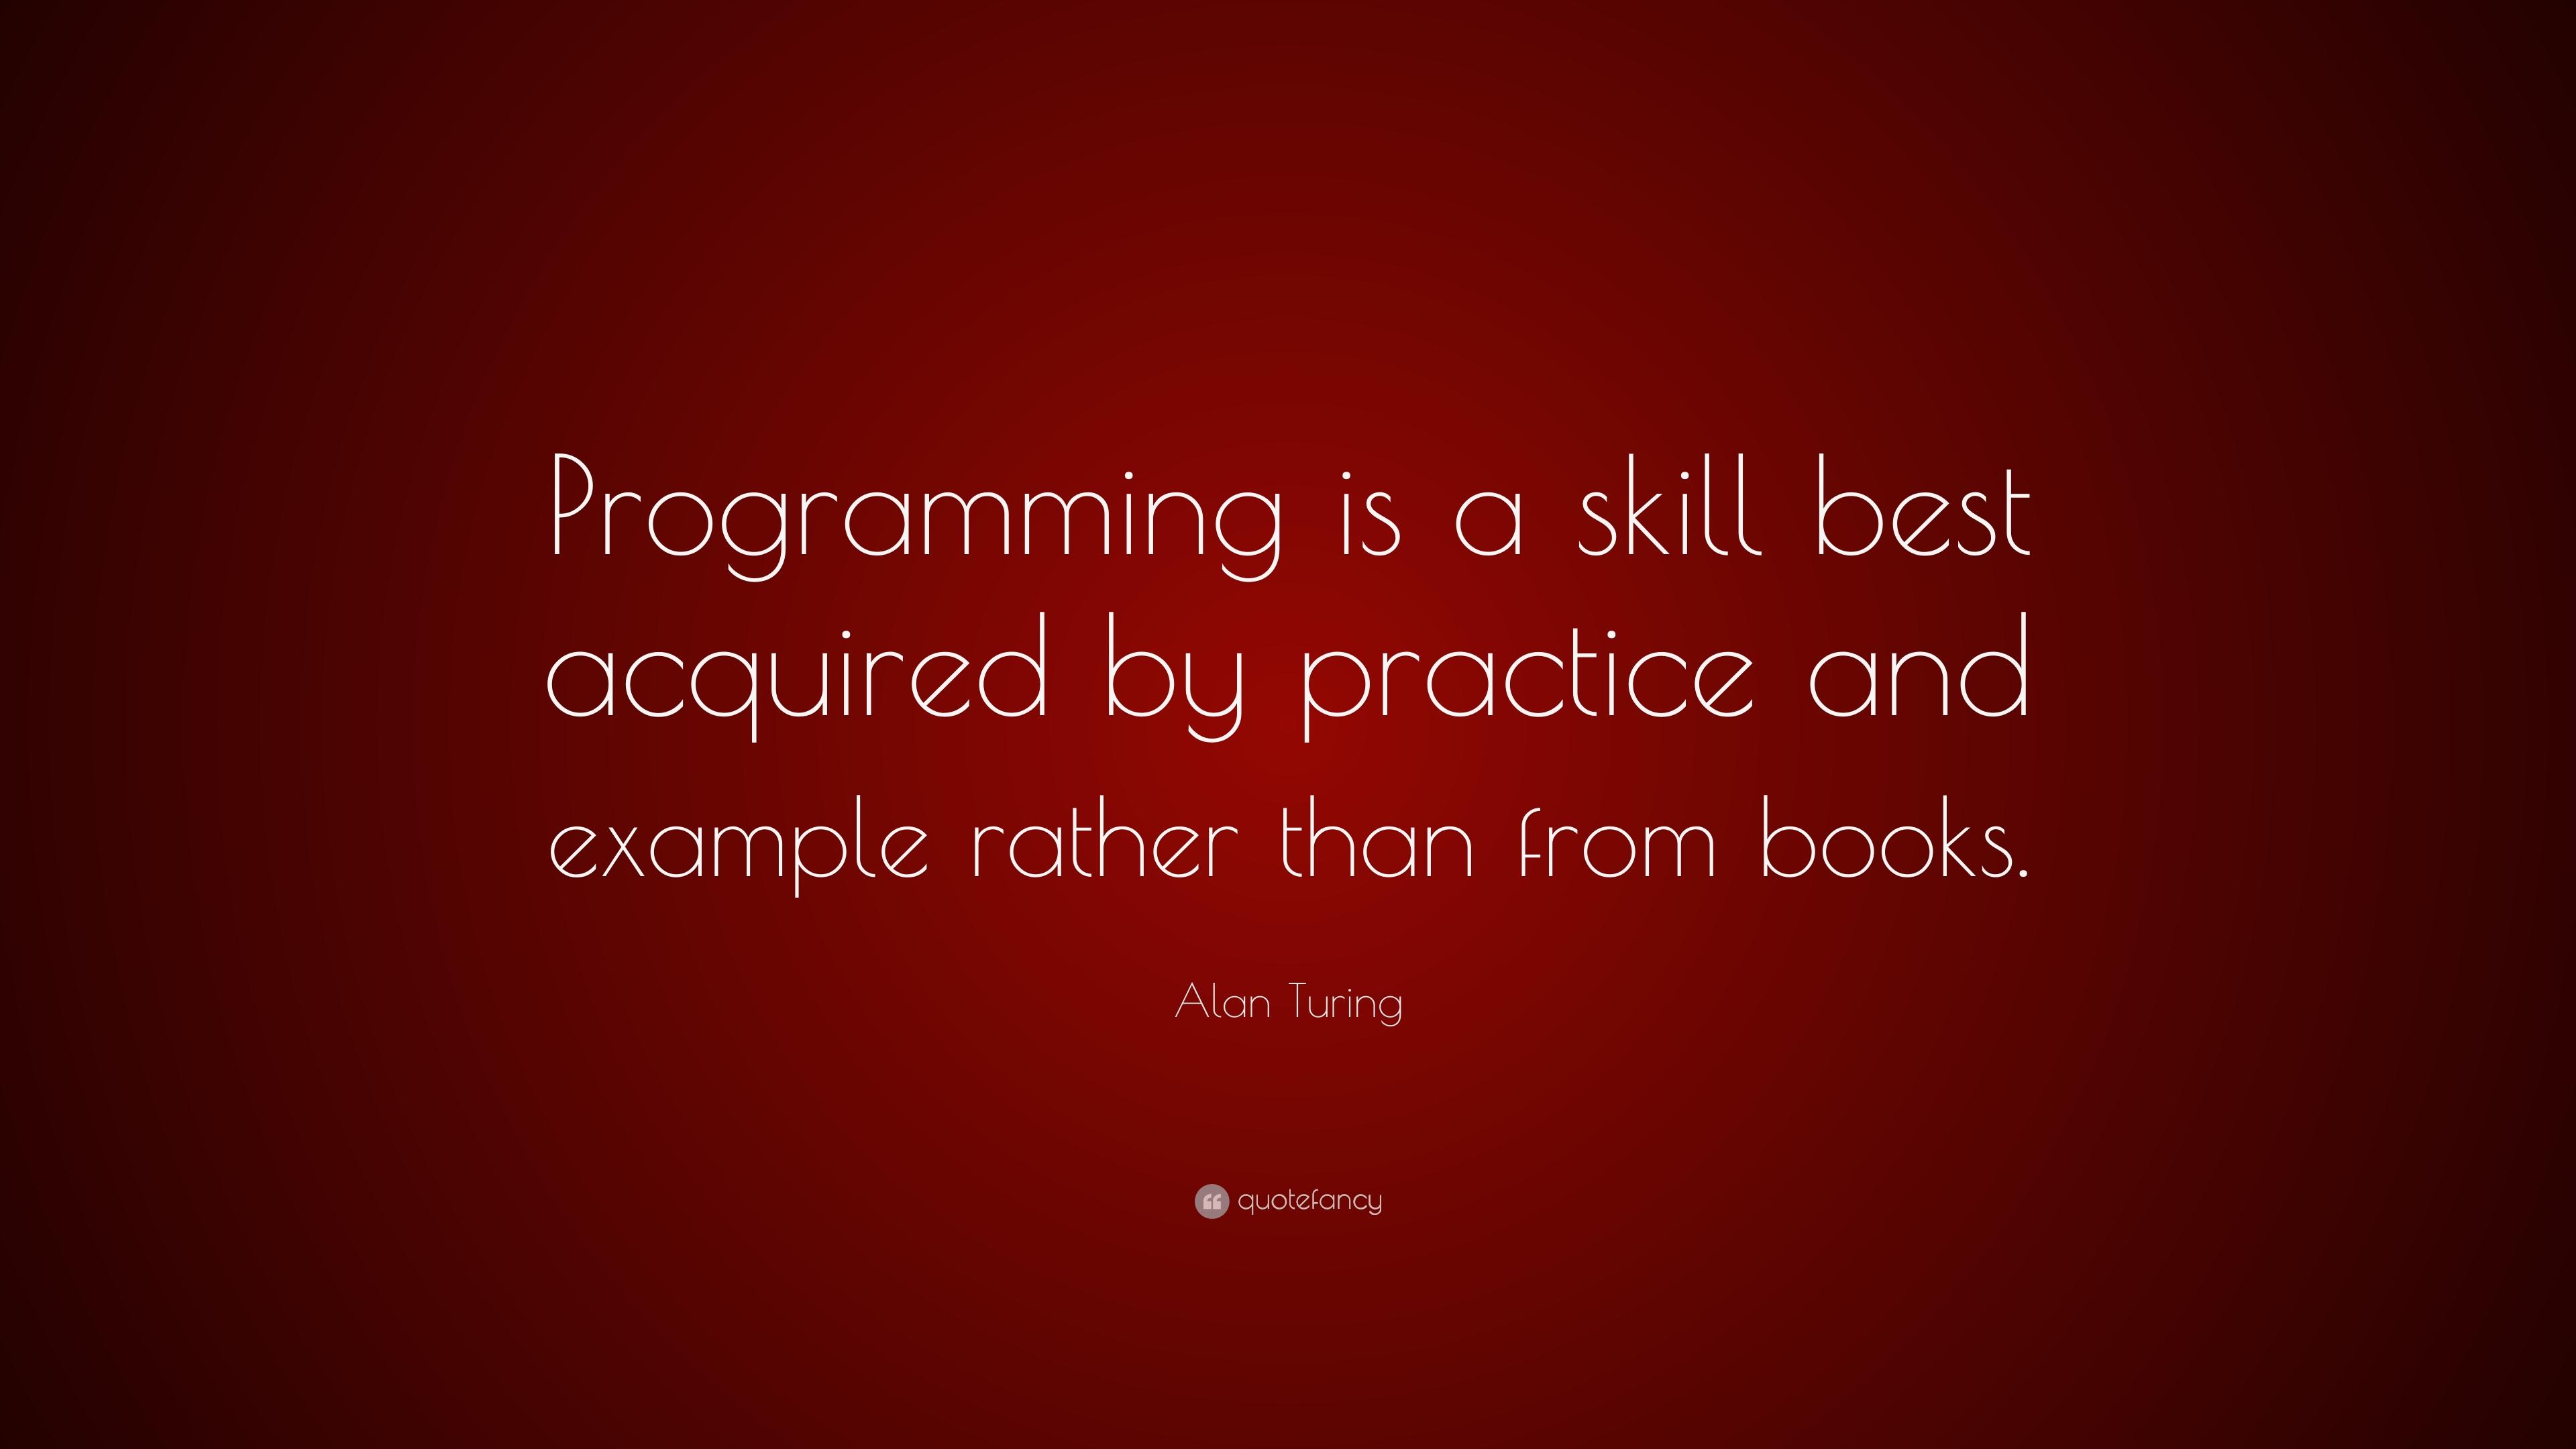 Alan Turing Quote: “Programming is a skill best acquired